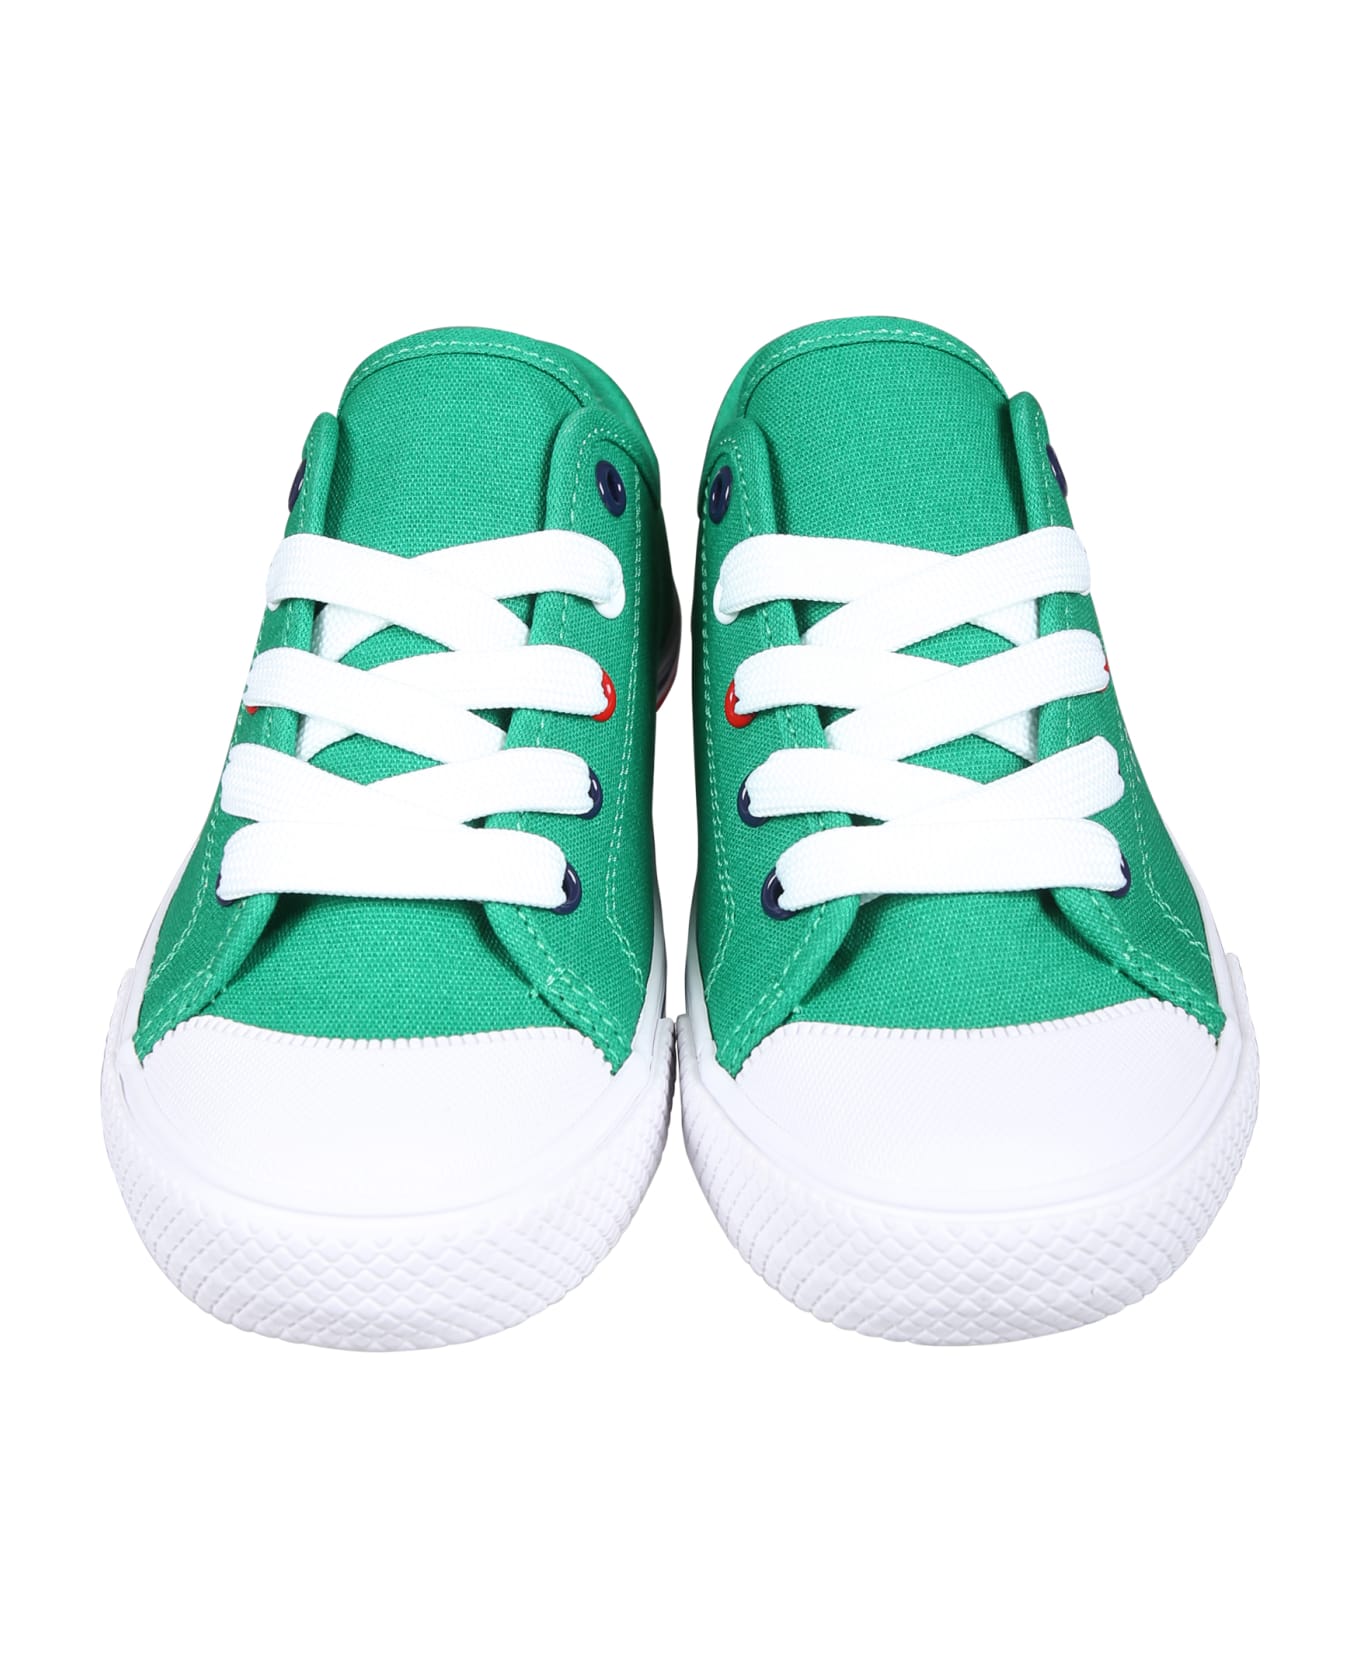 Tommy Hilfiger Green Sneakers For Kids With Logo - Green シューズ